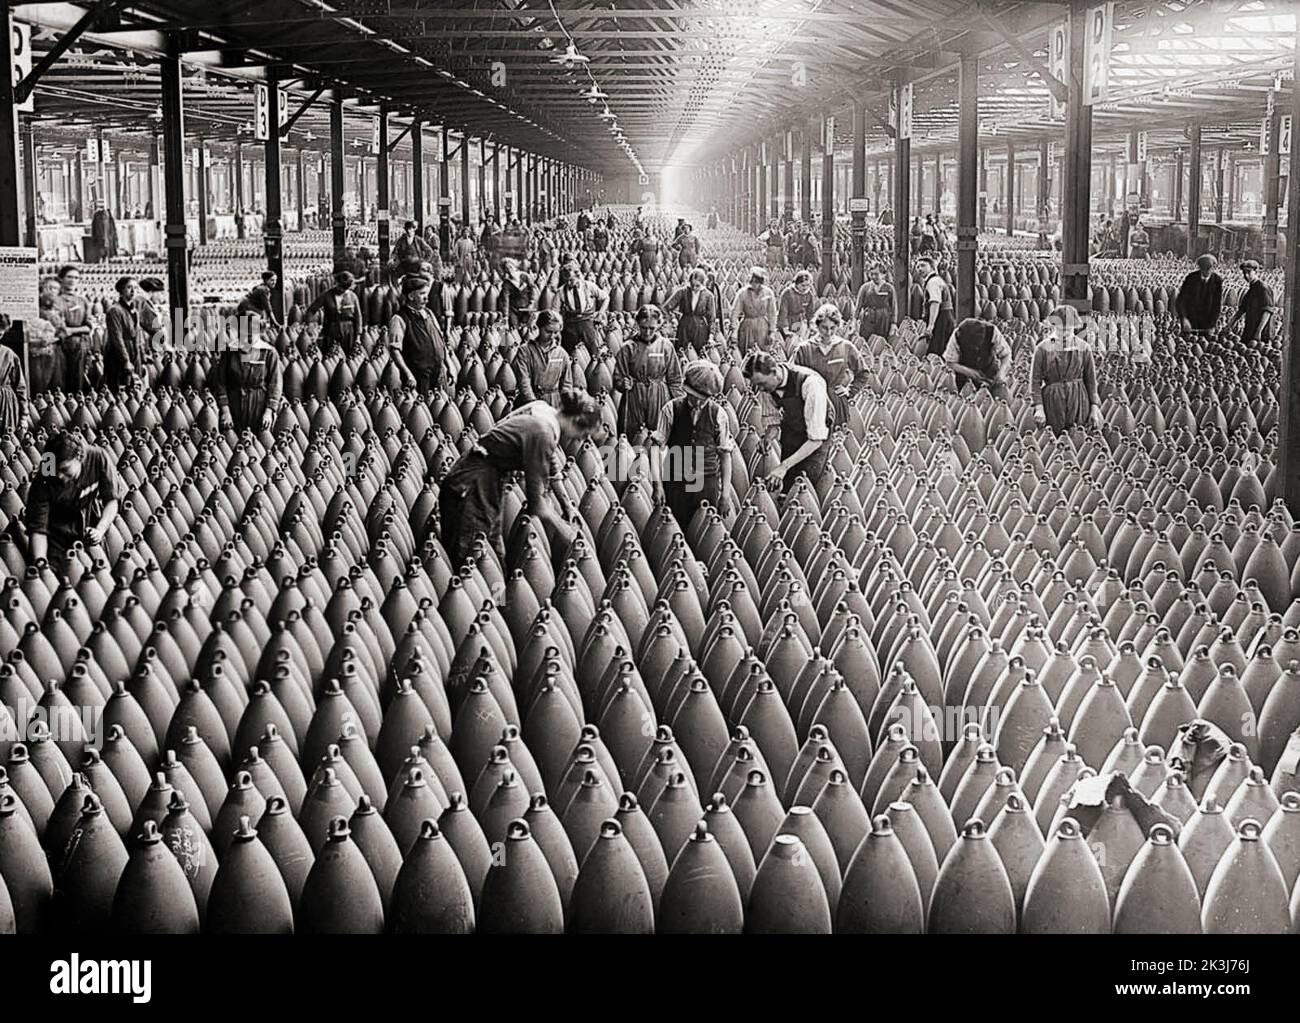 National Filling Factory in Chilwell in 1917. During World War One, large numbers of women were recruited into jobs vacated by men who had gone to fight in the war. The high demand for weapons resulted in the munitions factories becoming the largest single employer of women during 1918. By 1917 munitions factories, which primarily employed women workers, produced 80% of the weapons and shells used by the British Army. Stock Photo